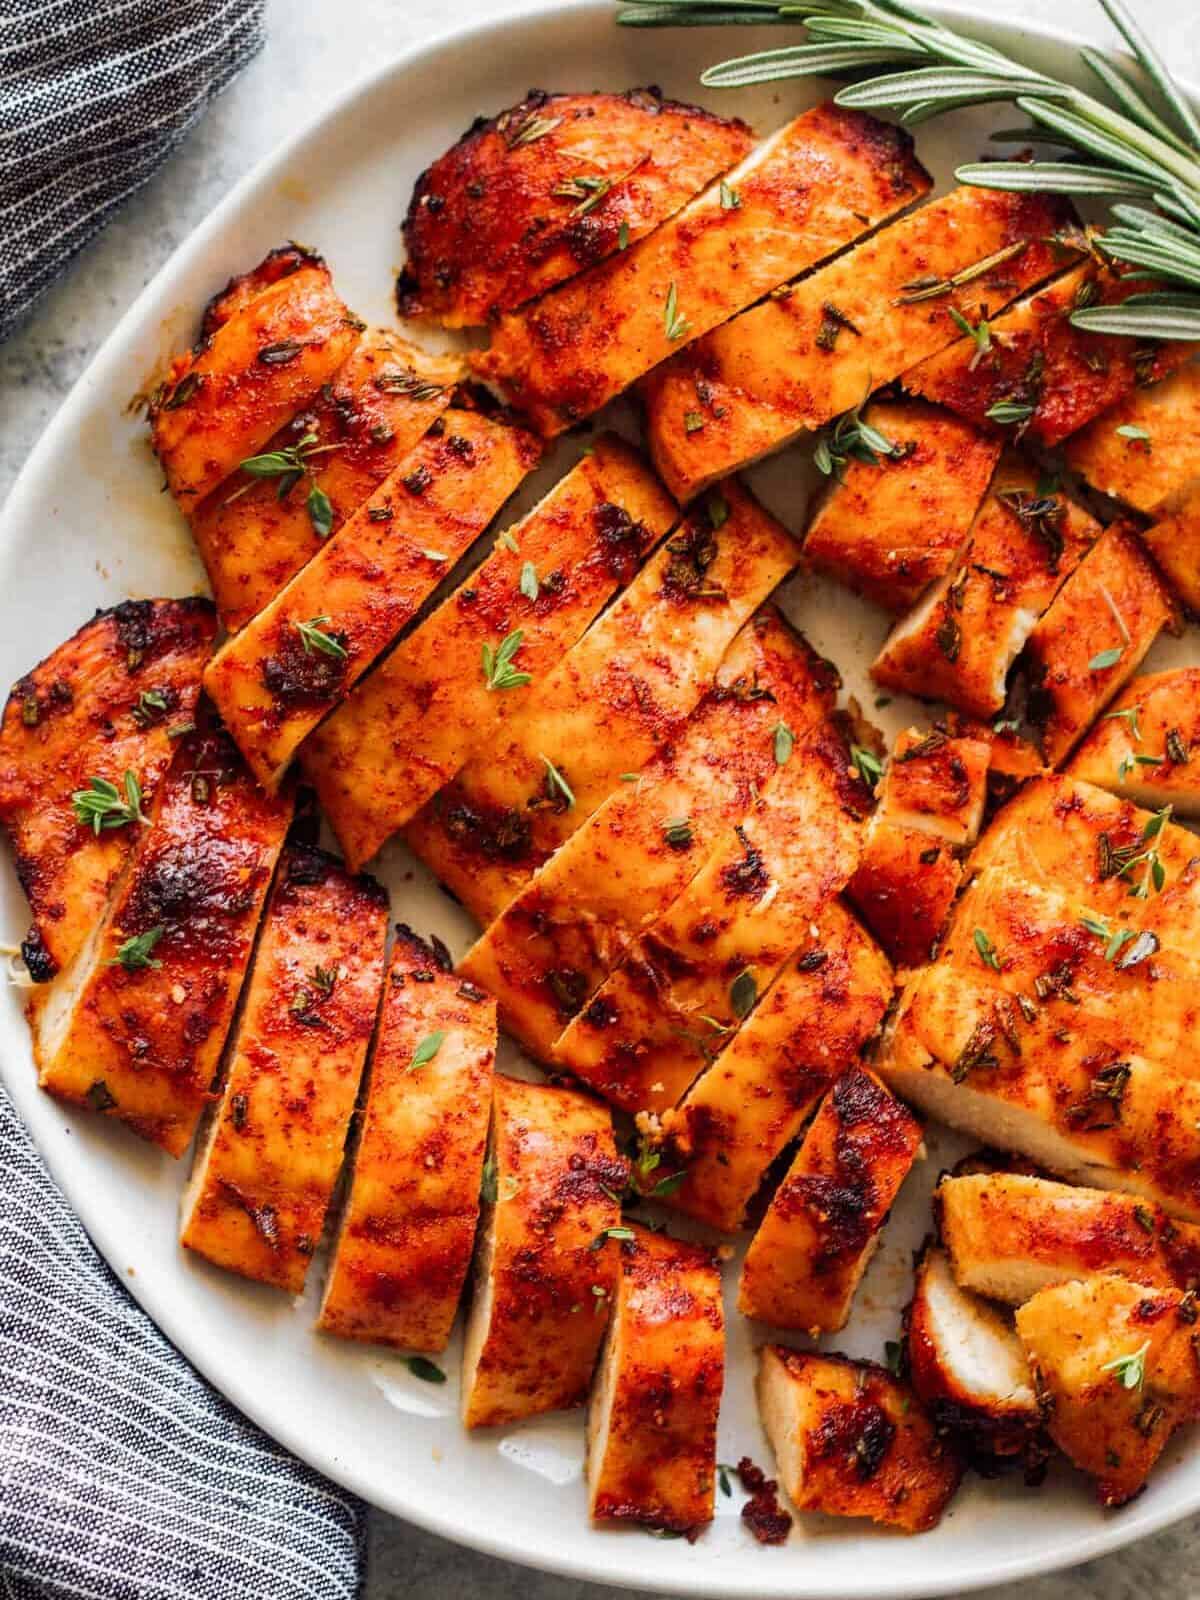 sliced baked chicken breast on large plate